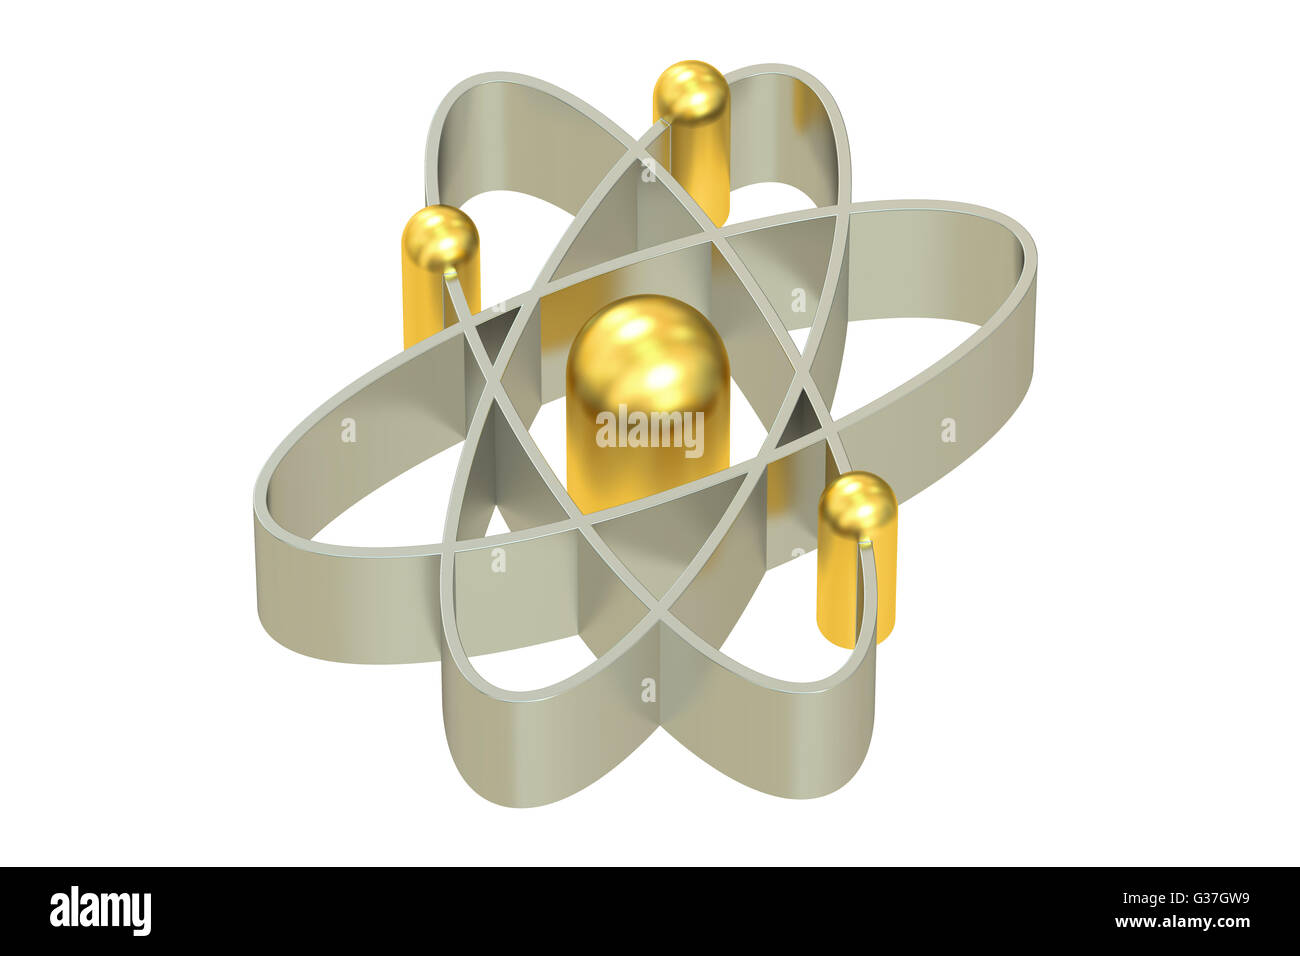 Atom, 3D rendering isolated on white background Stock Photo